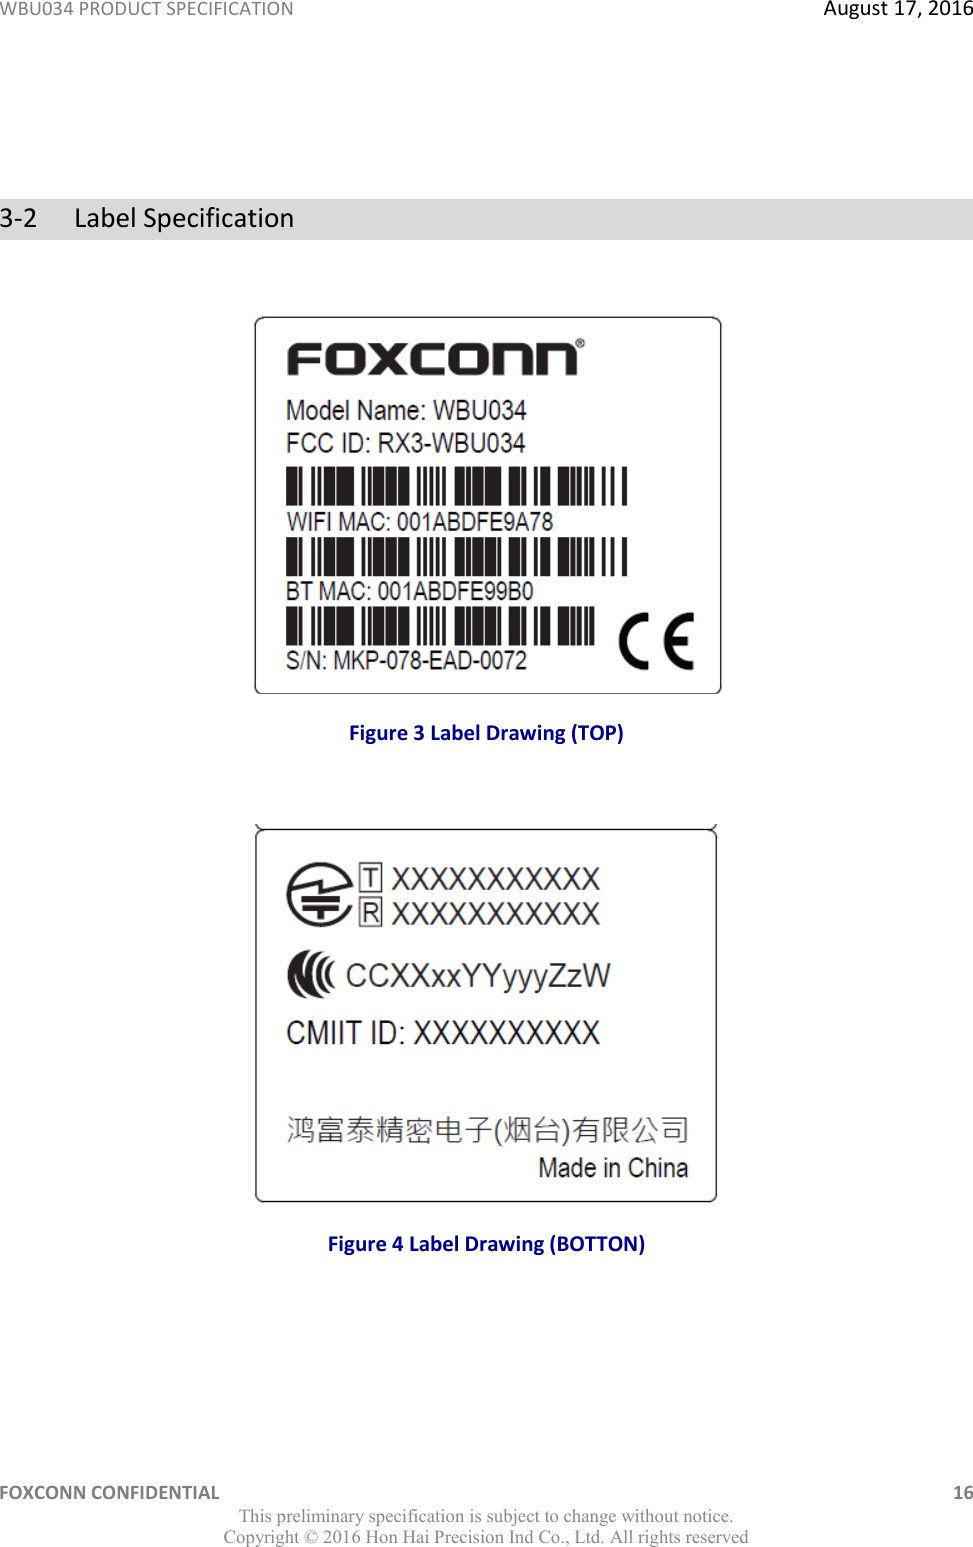 WBU034 PRODUCT SPECIFICATION  August 17, 2016 FOXCONN CONFIDENTIAL    16 This preliminary specification is subject to change without notice. Copyright ©  2016 Hon Hai Precision Ind Co., Ltd. All rights reserved   3-2   Label Specification    Figure 3 Label Drawing (TOP)   Figure 4 Label Drawing (BOTTON)    